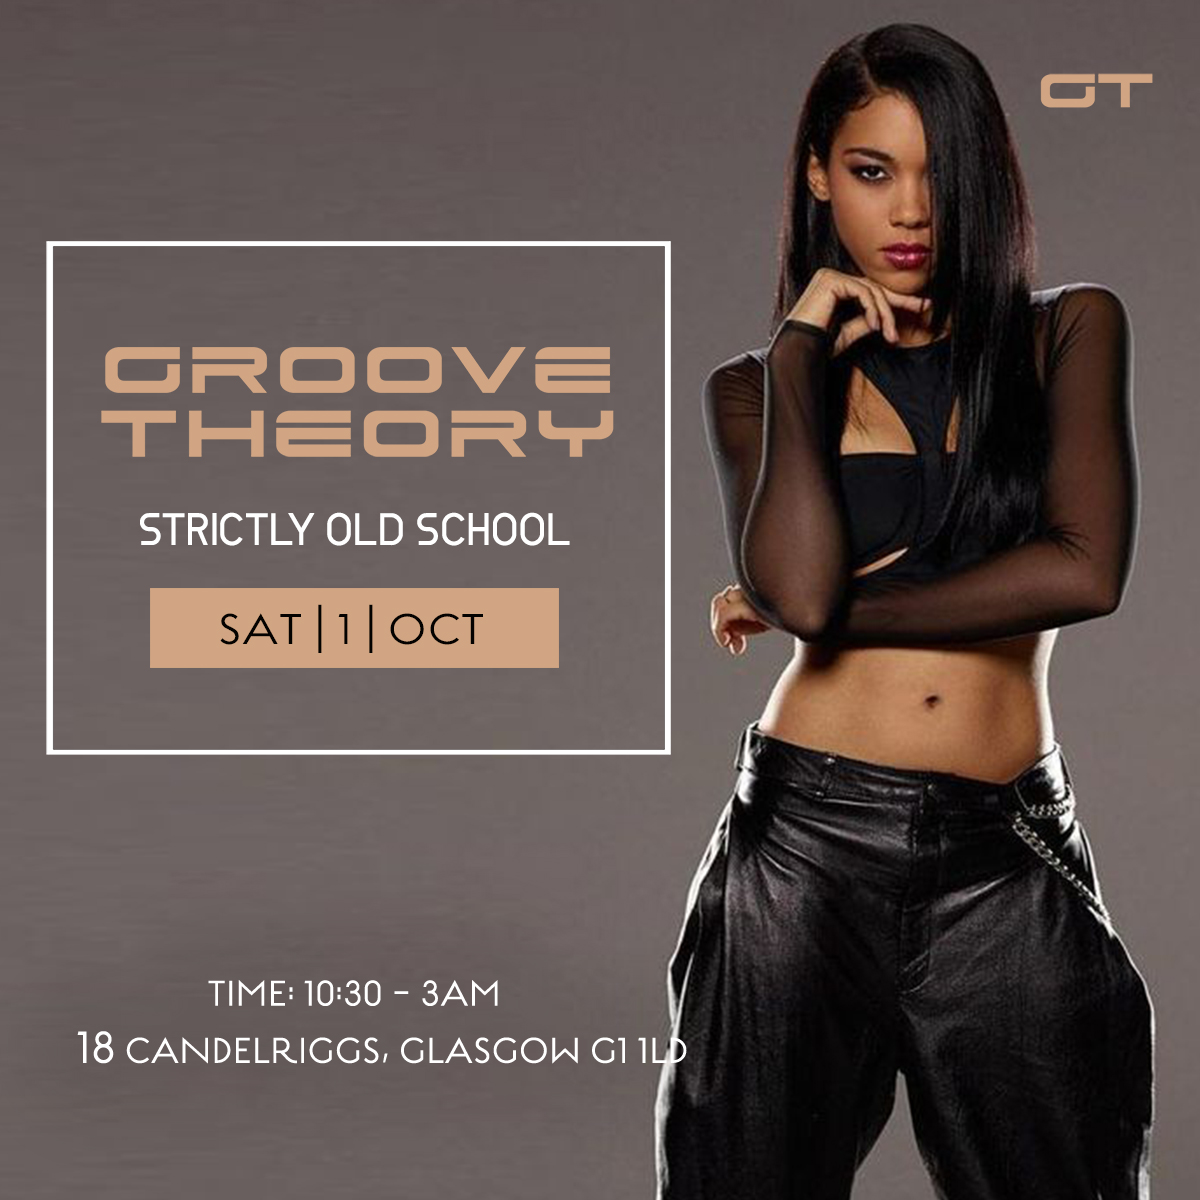 Groove Theory 2022 with Gtown Desi